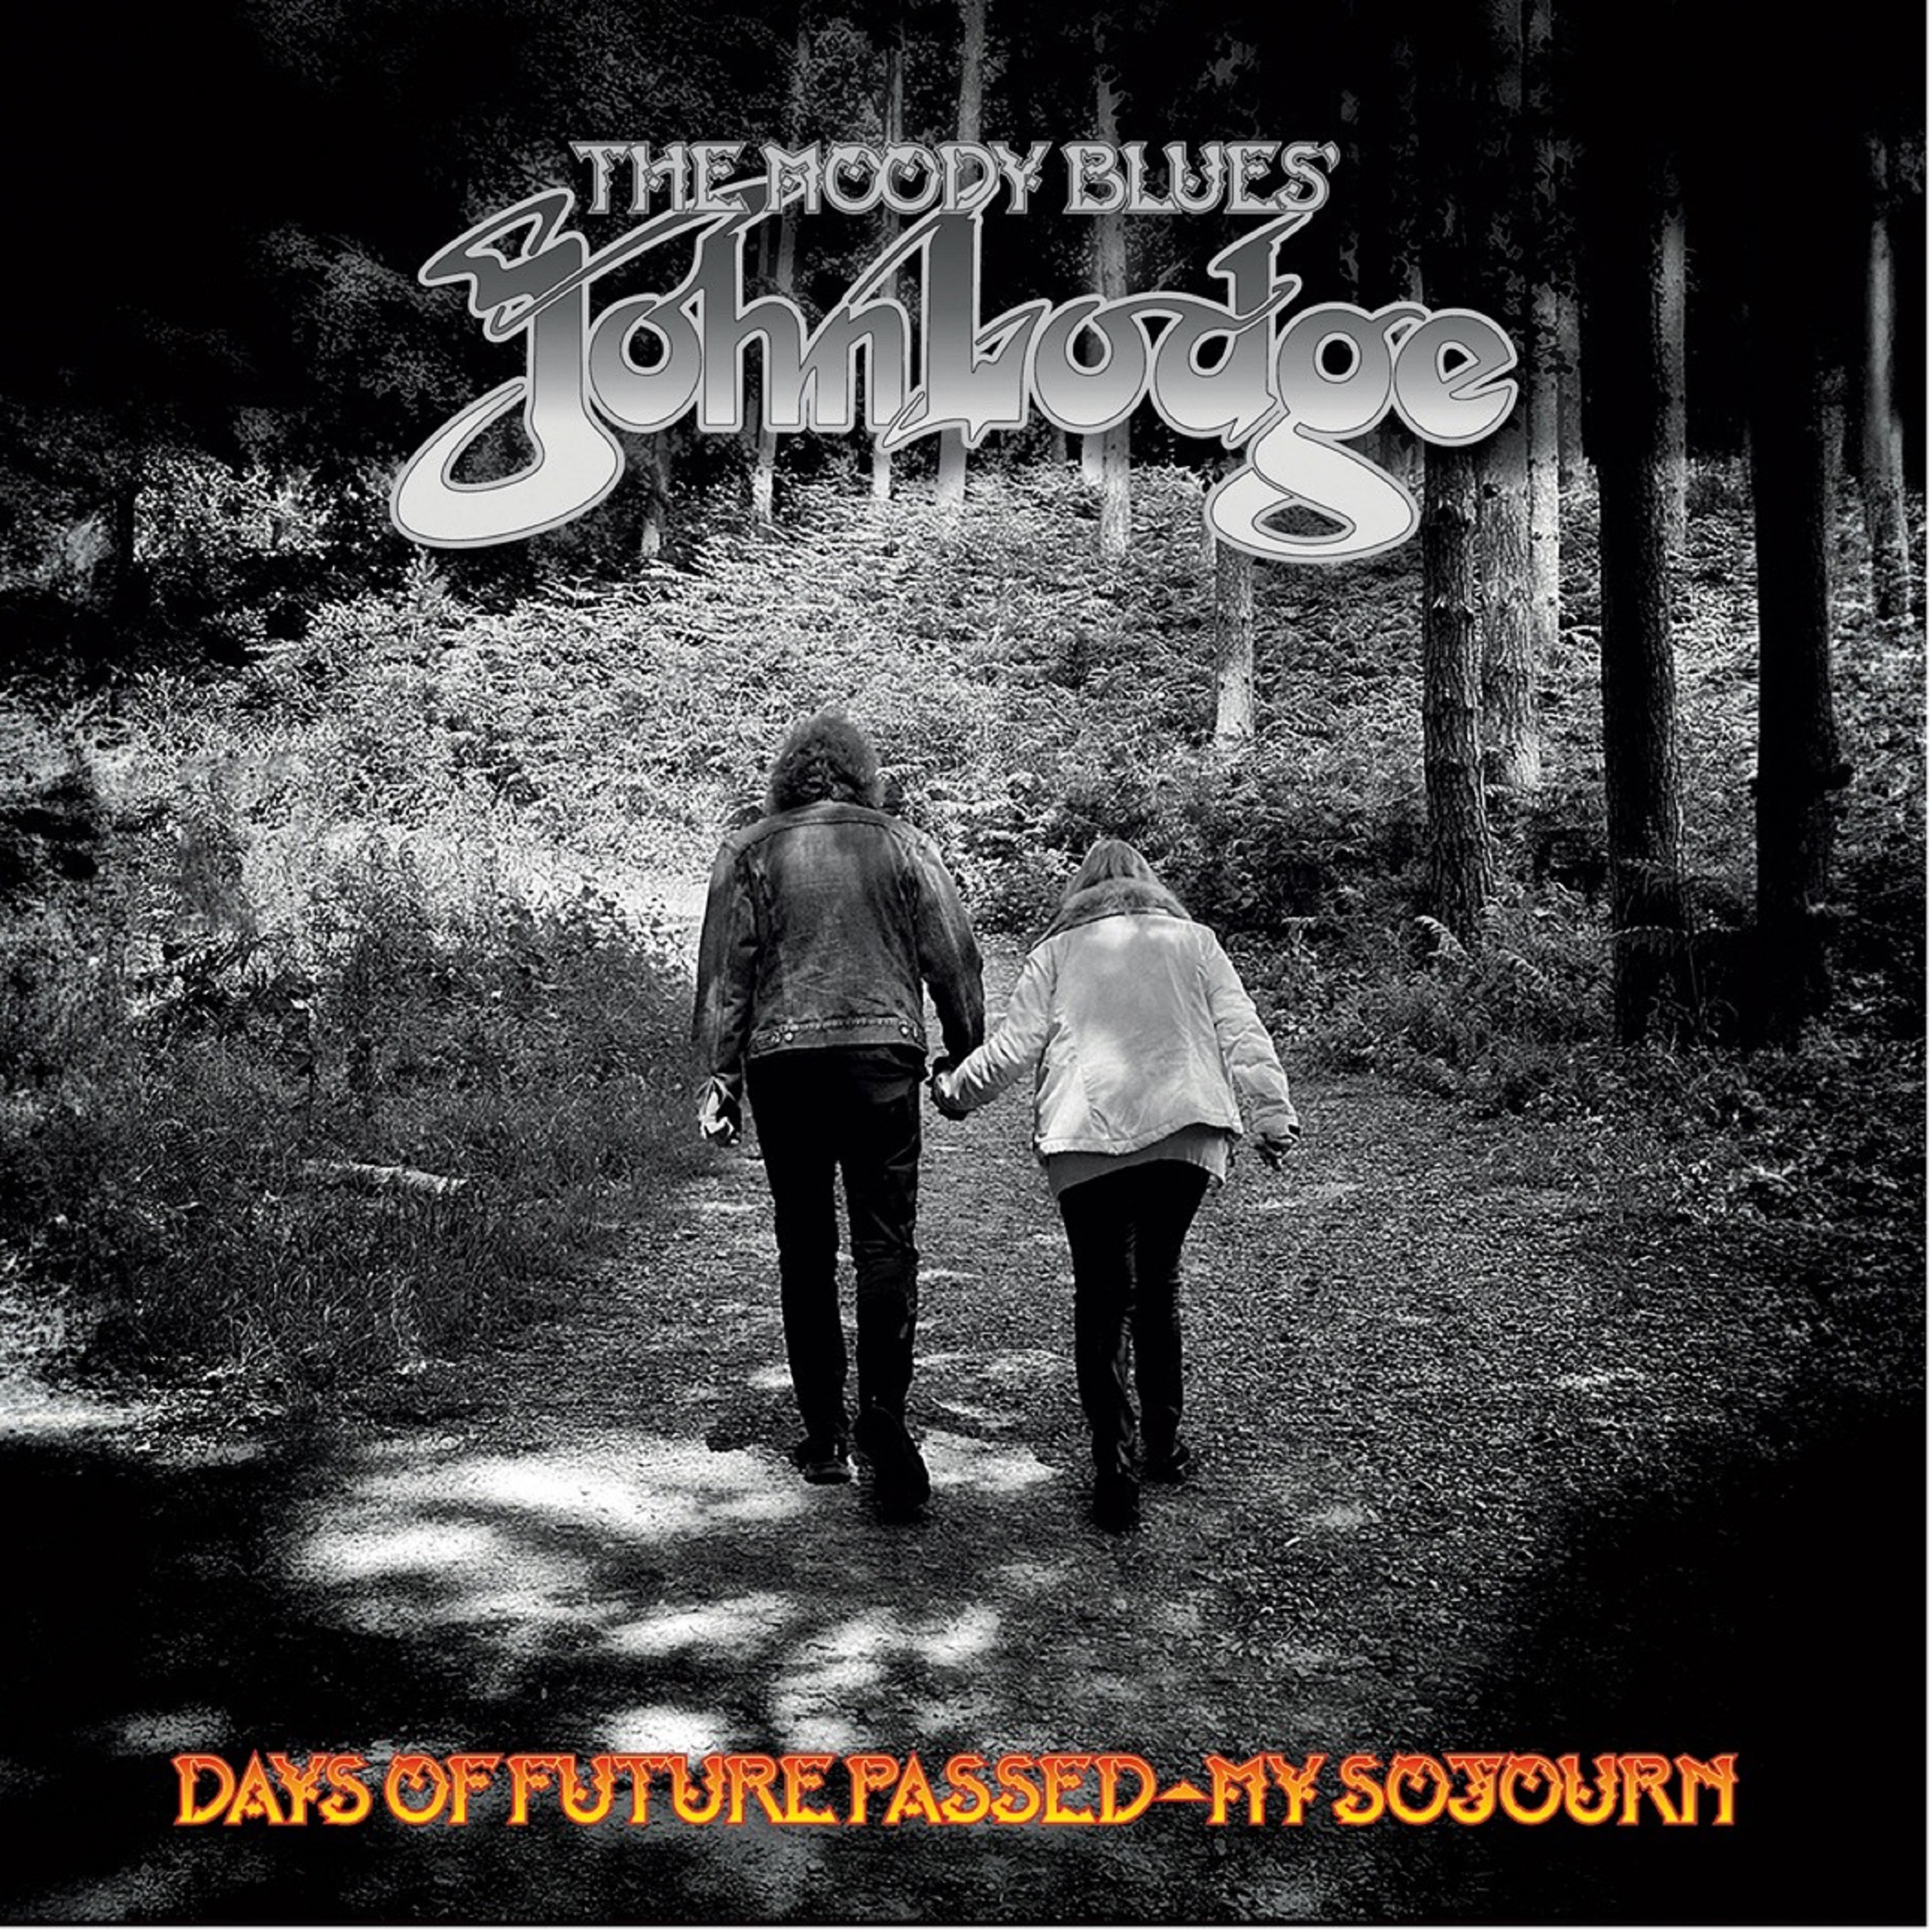 THE MOODY BLUES’ JOHN LODGE ANNOUNCES RELEASE OF ALBUM ‘DAYS OF FUTURE PASSED – MY SOJOURN’ TO ACCOMPANY HIS JULY 2023 USA ‘DAYS OF FUTURE PASSED’ TOUR - STARTING JULY 18TH